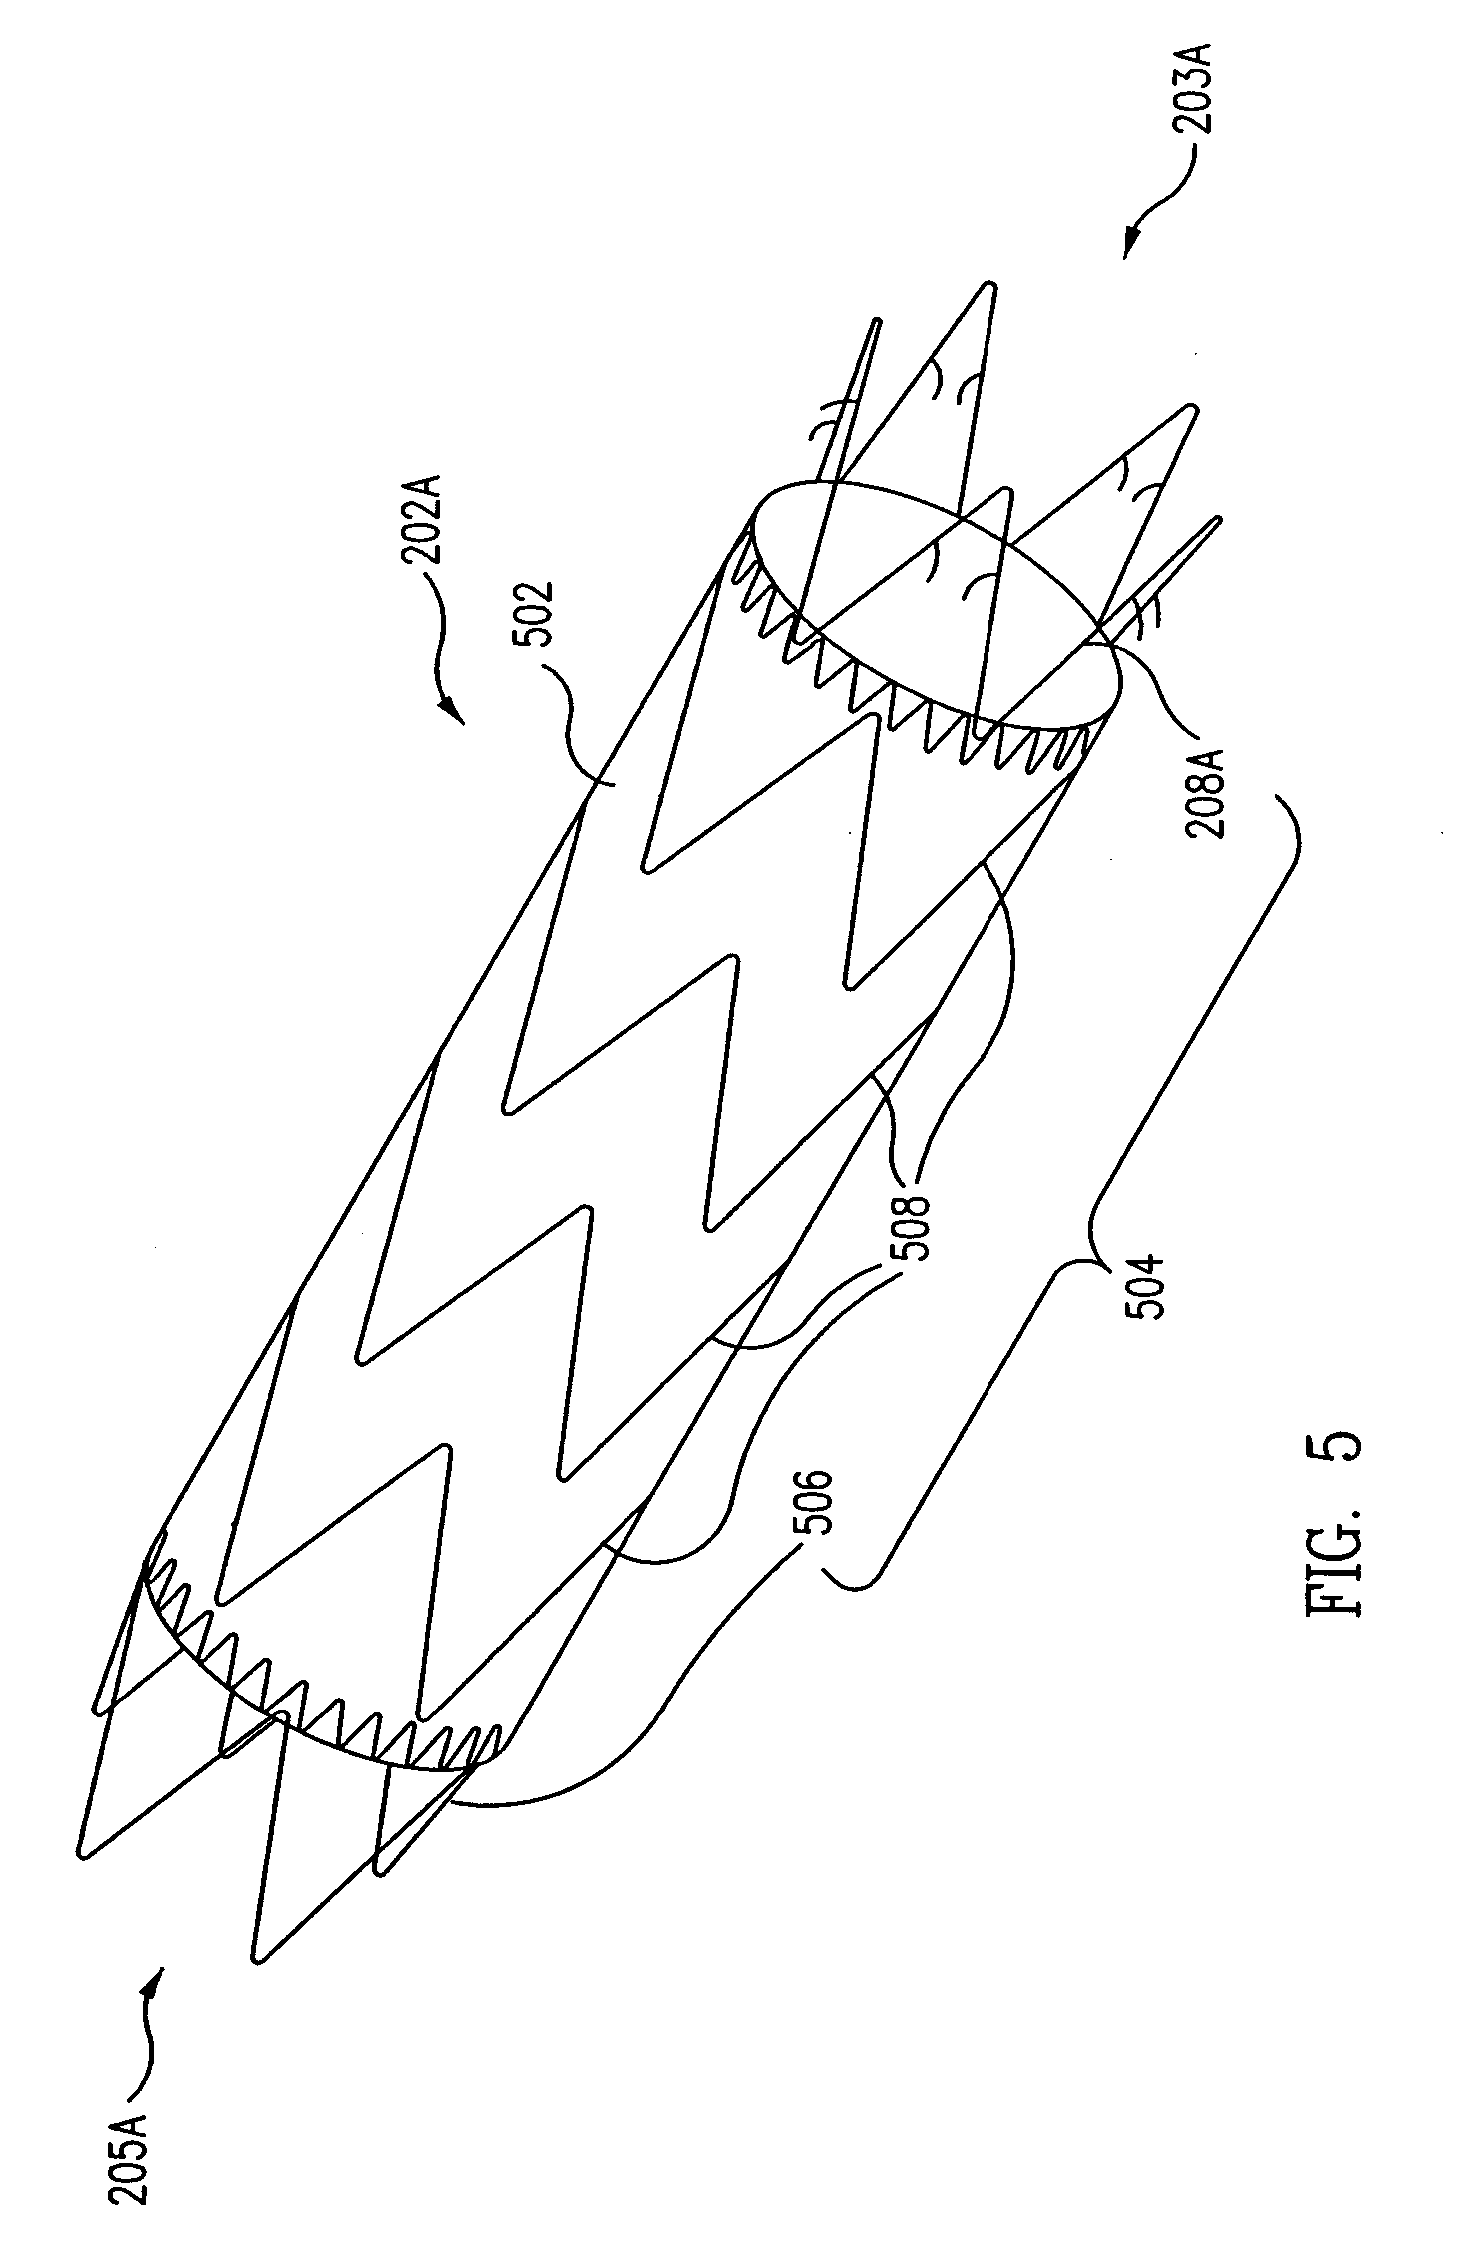 Delivery System for Stent-Graft